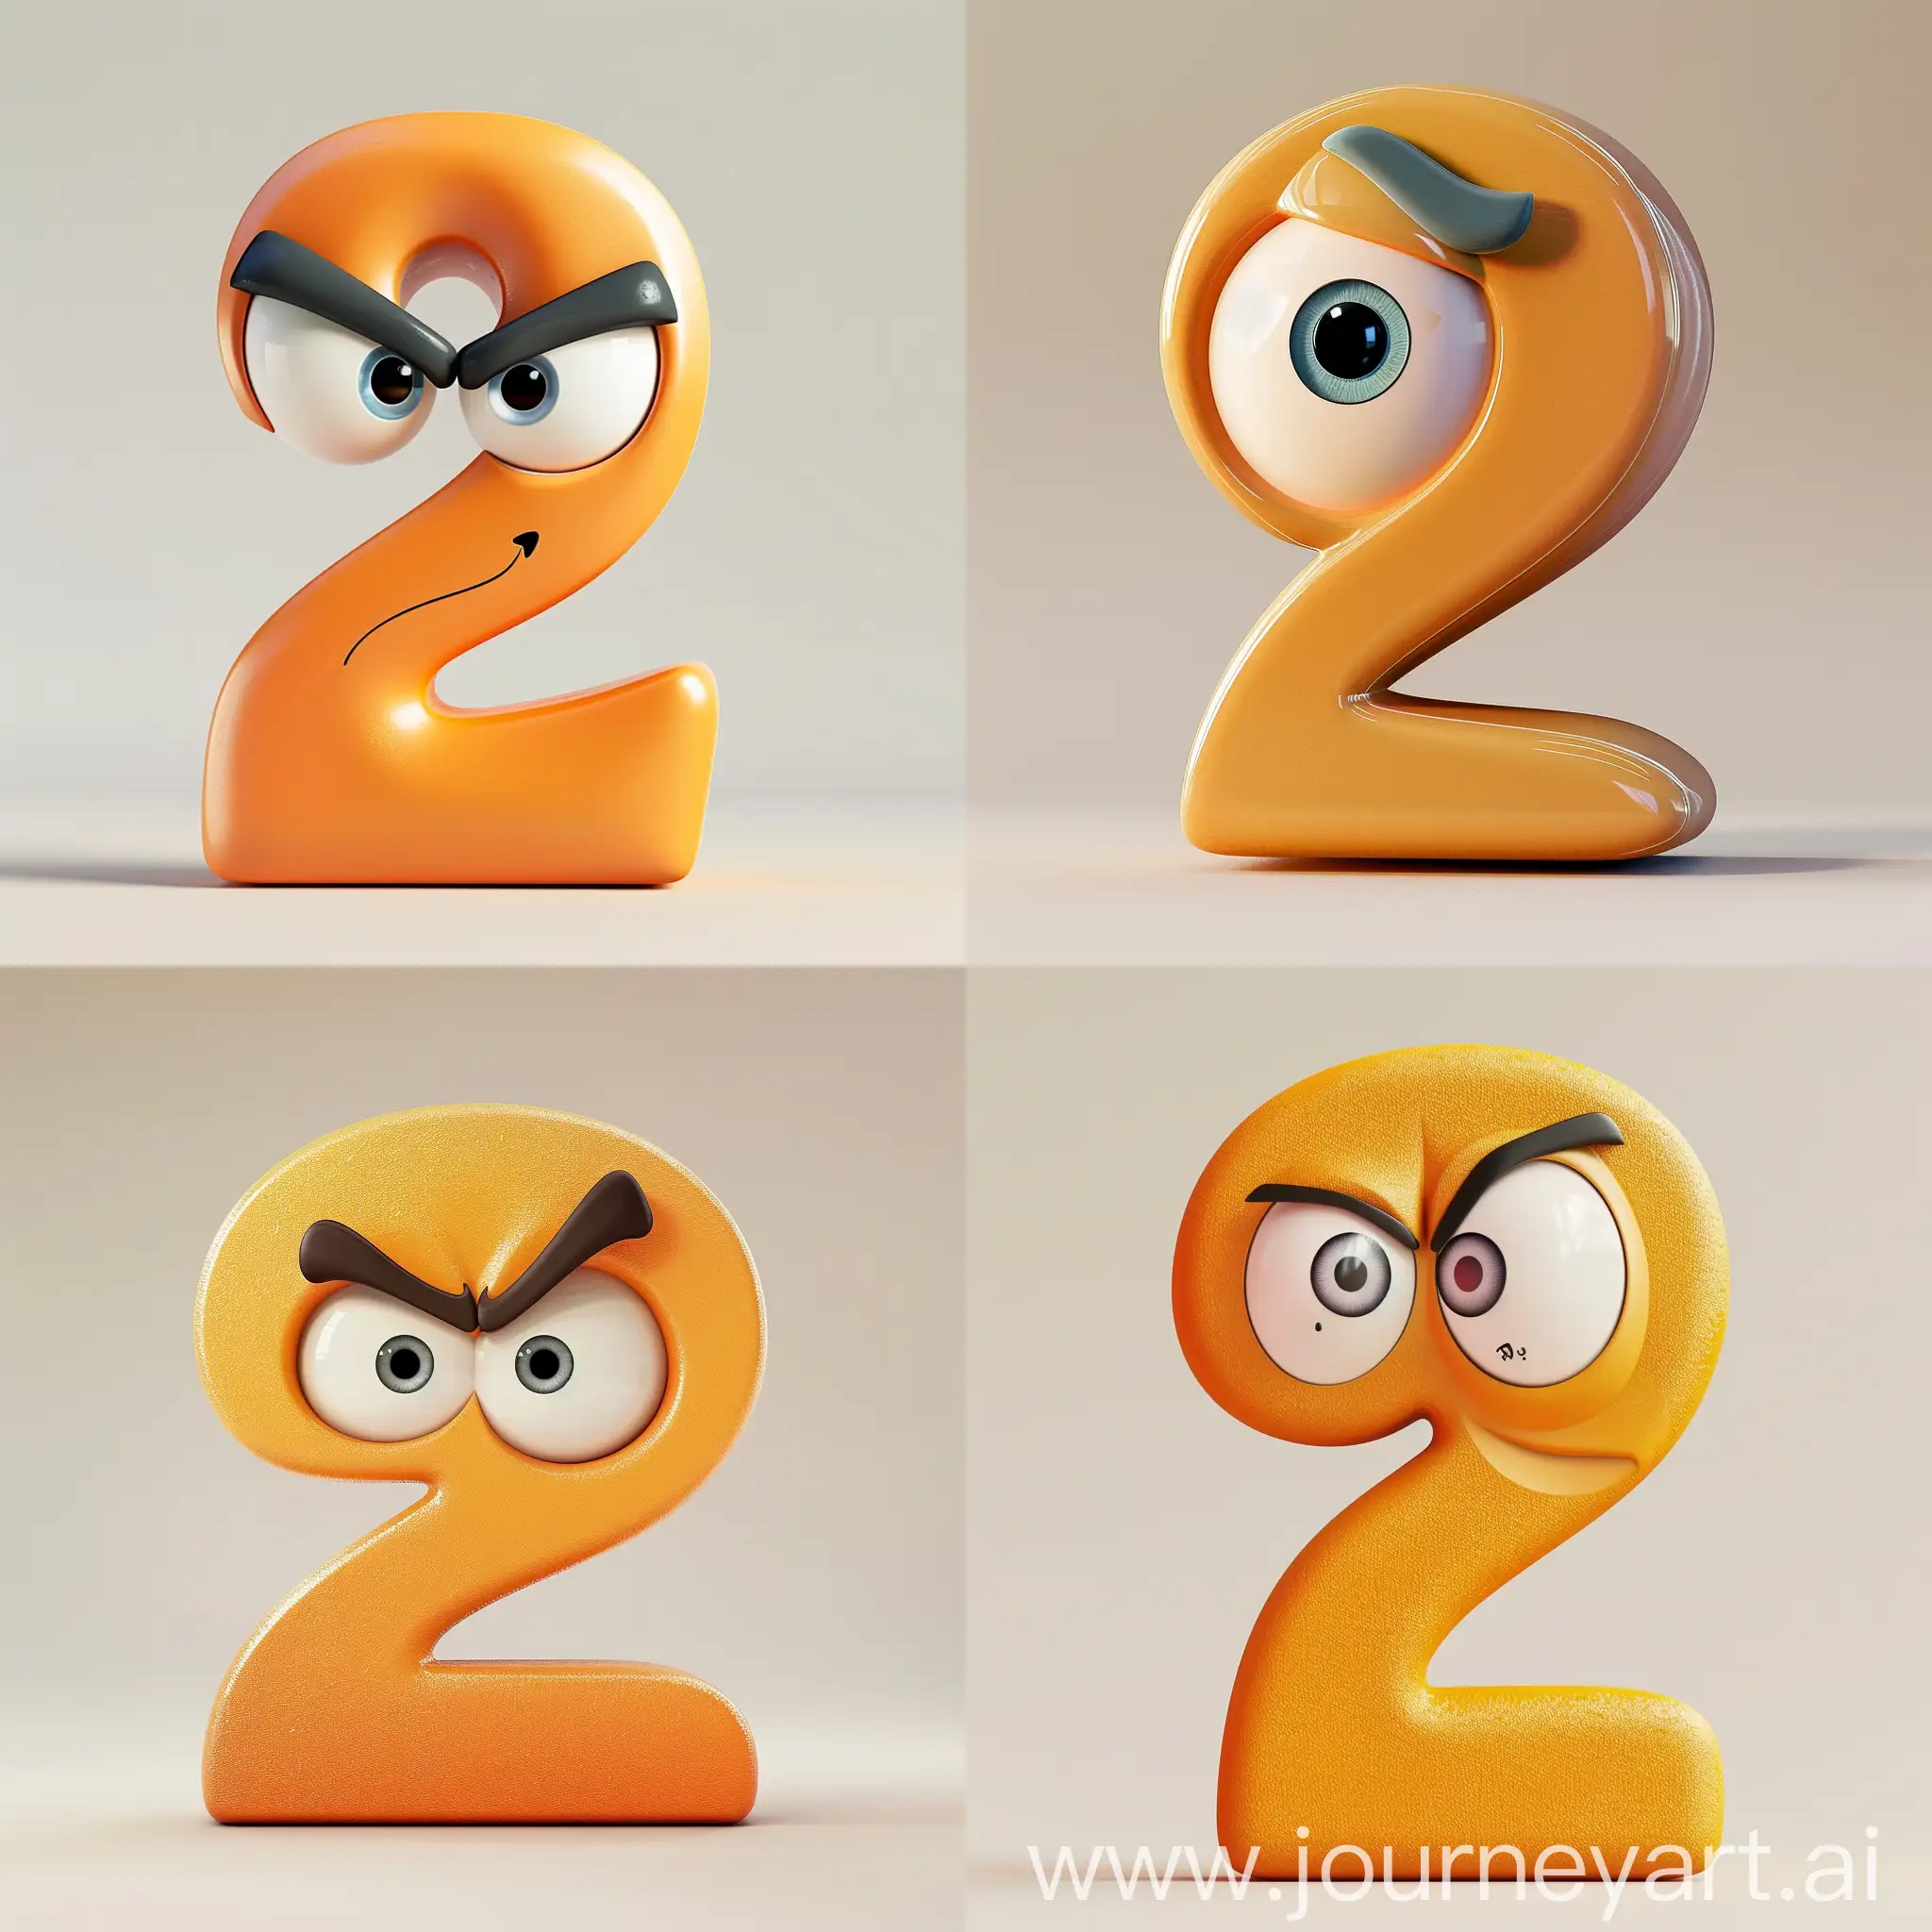 Symmetrical-Pixar-Animation-Angry-Number-Two-with-Big-Eyes-in-Side-View